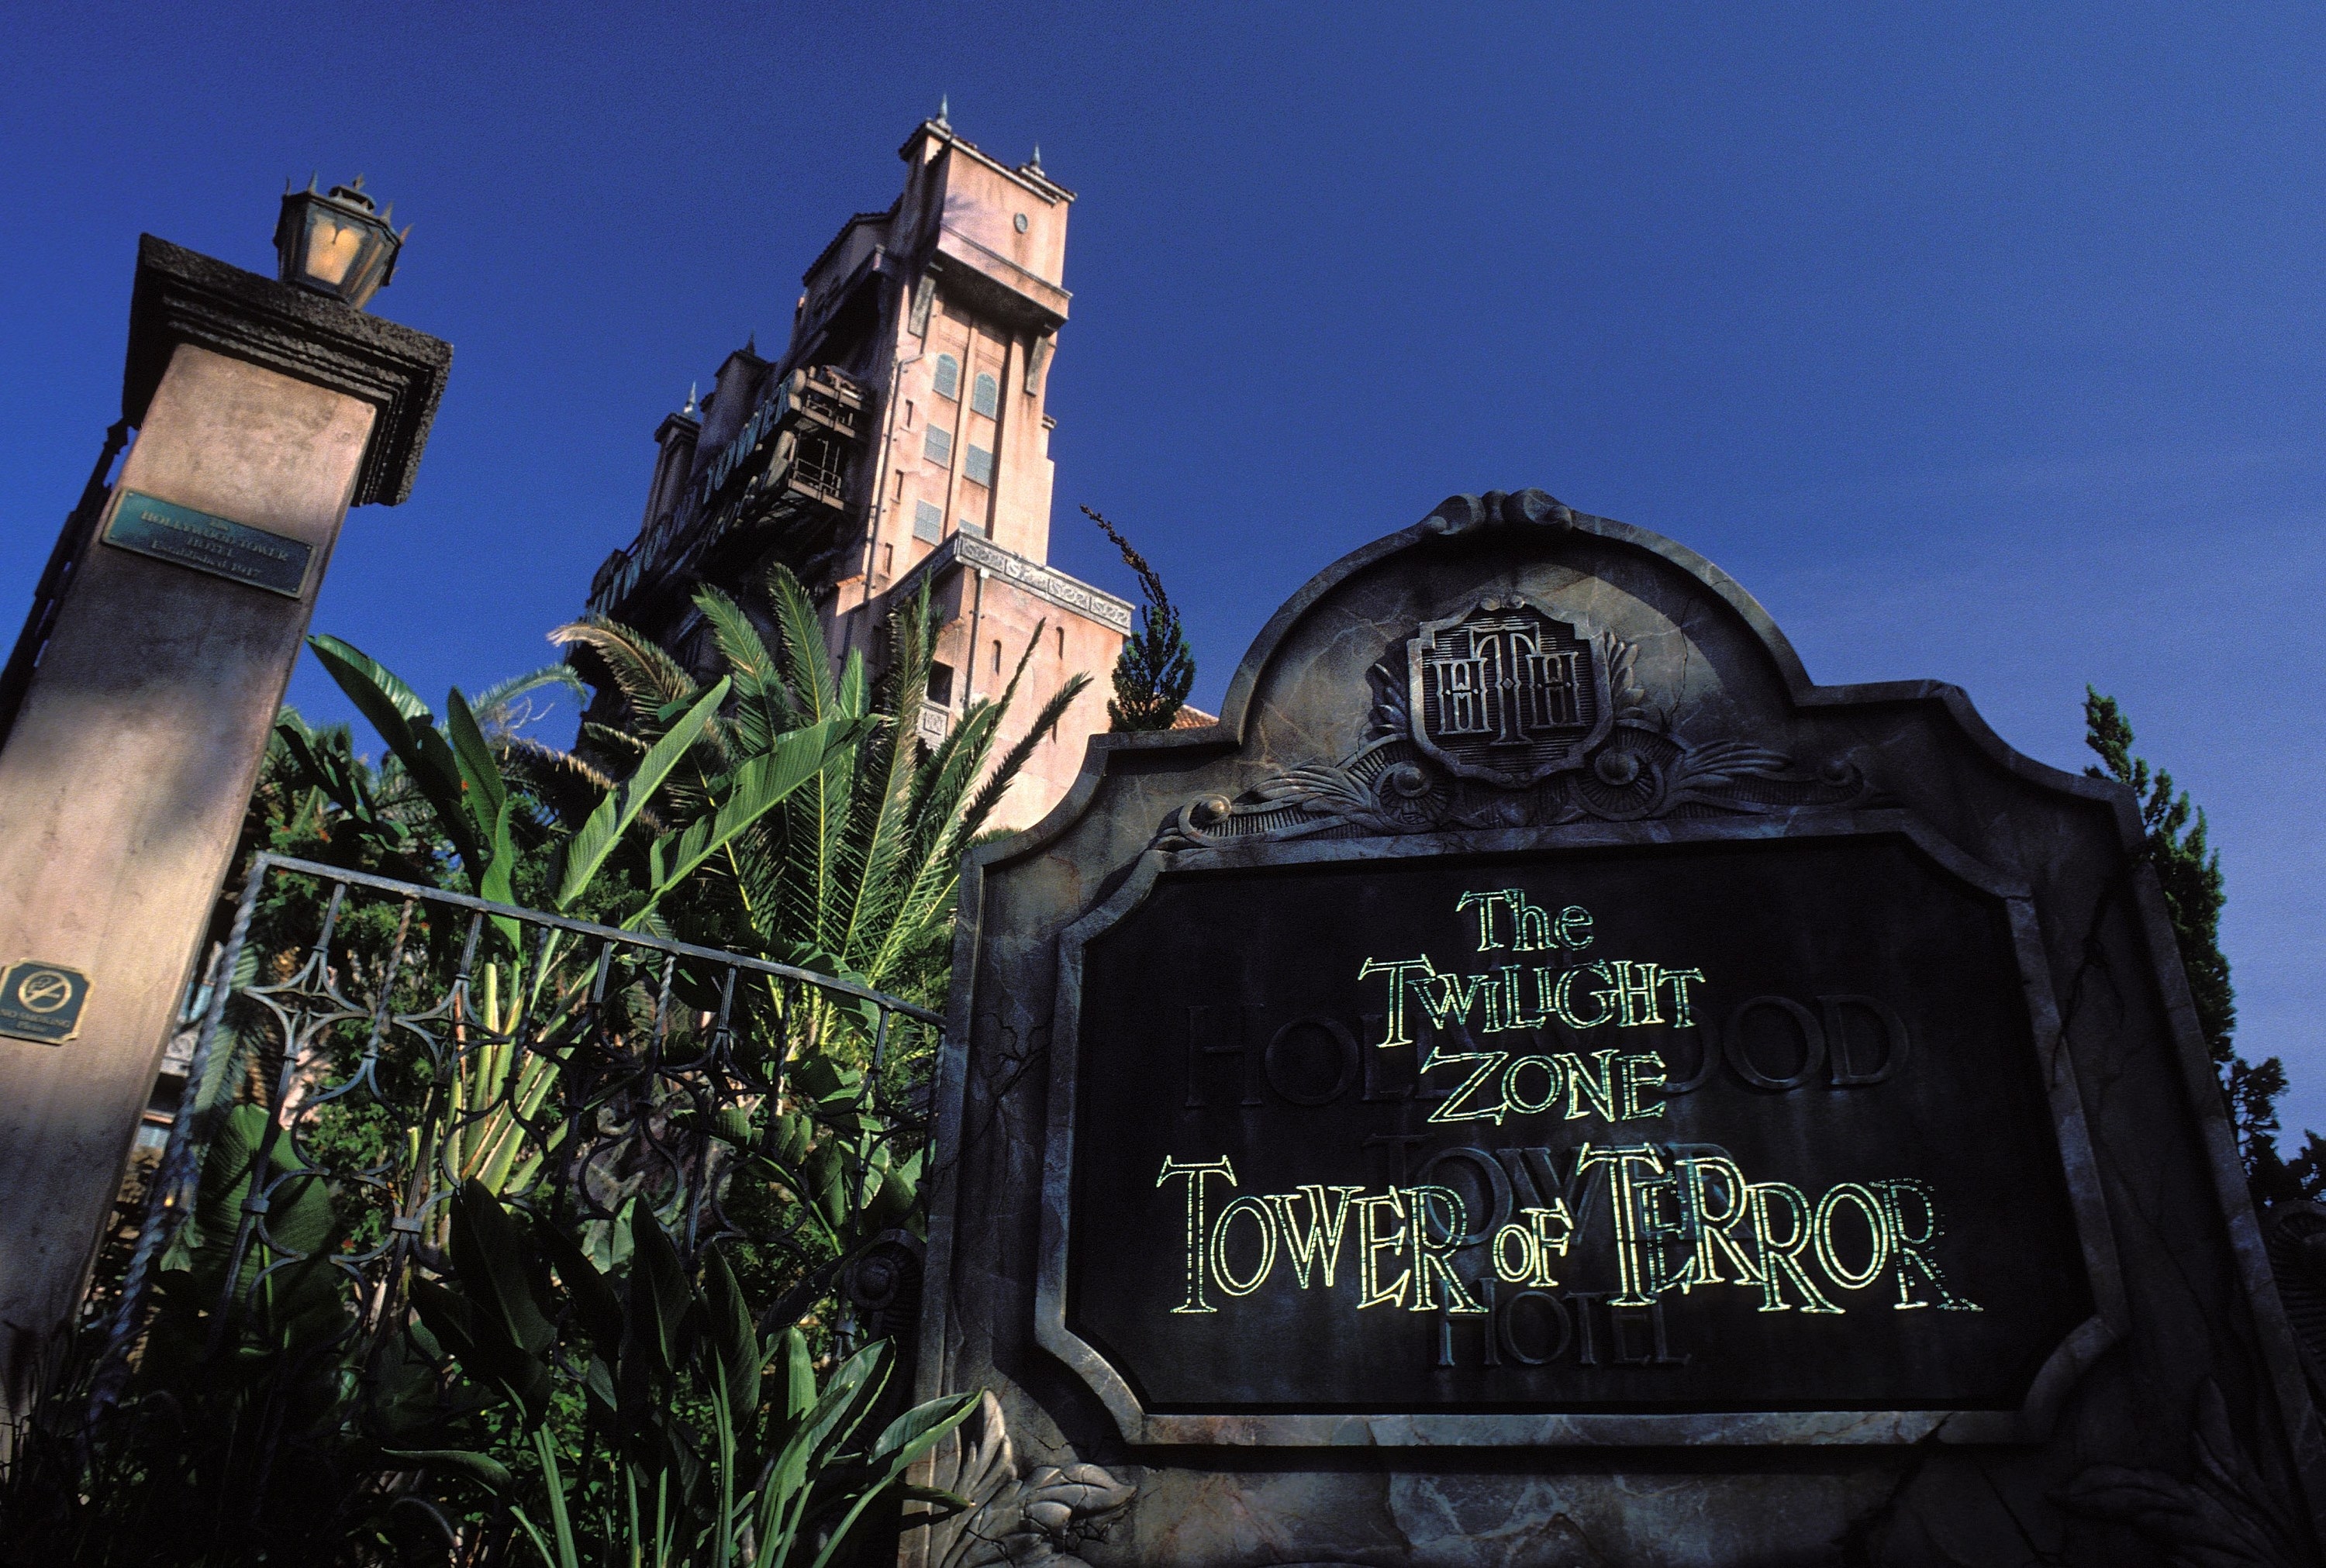 Photo of the Tower of Terror sign with the ride in the background in 1994